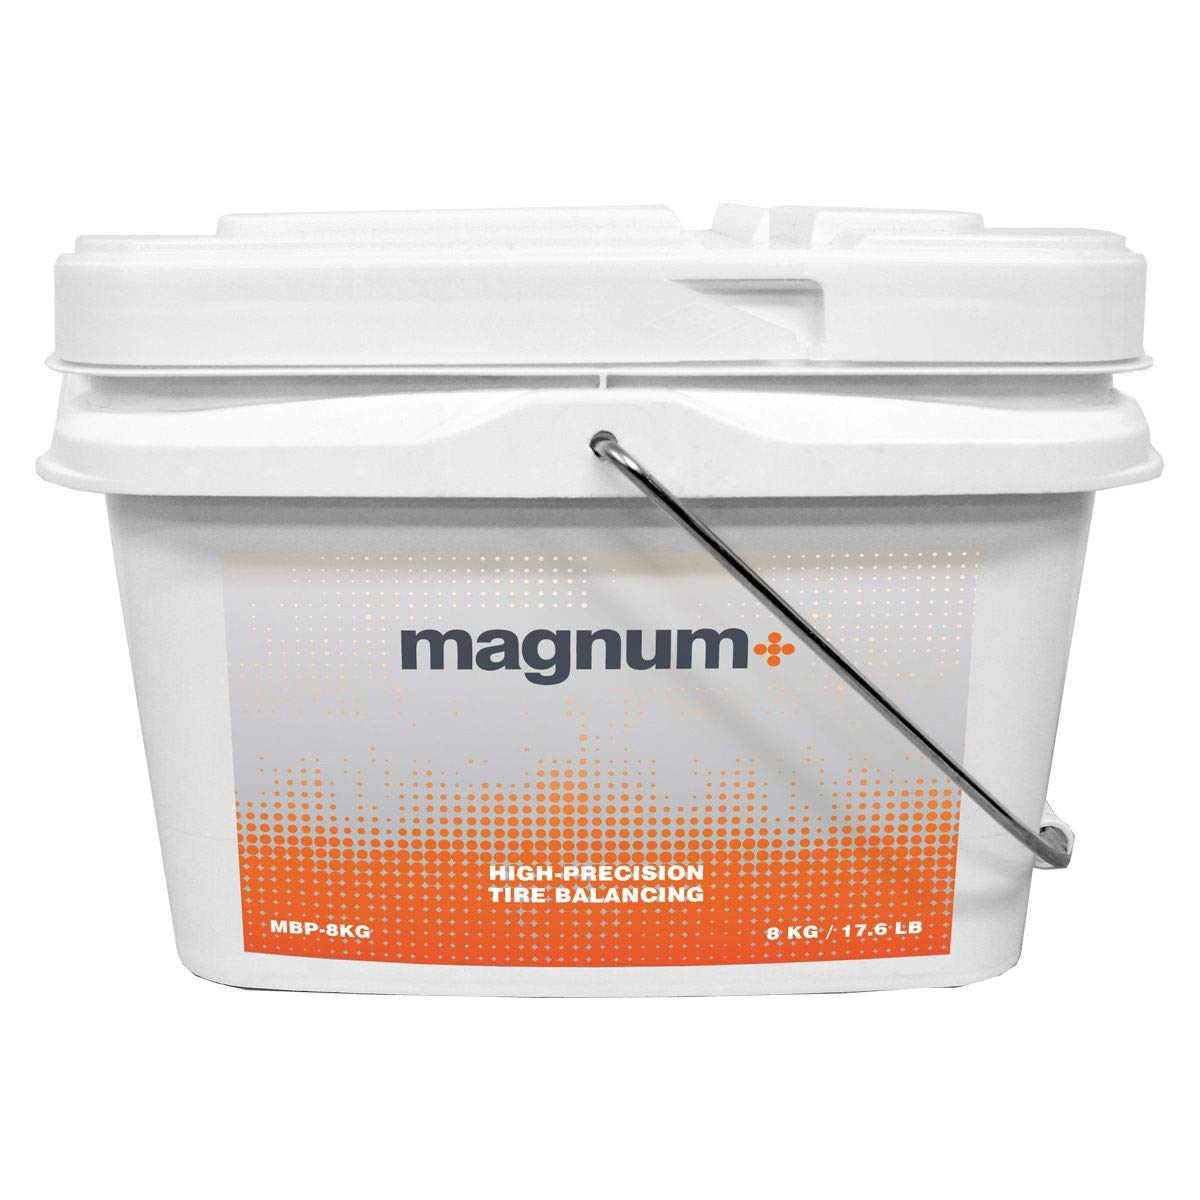 Magnum+ Tire Balancing Beads Bulk Tub 17.6 lb. with Scoop for Truck, SUV,  car, Van, RV and Off-Road Tires. TPMS Compatible Glass Balancing Beads. 